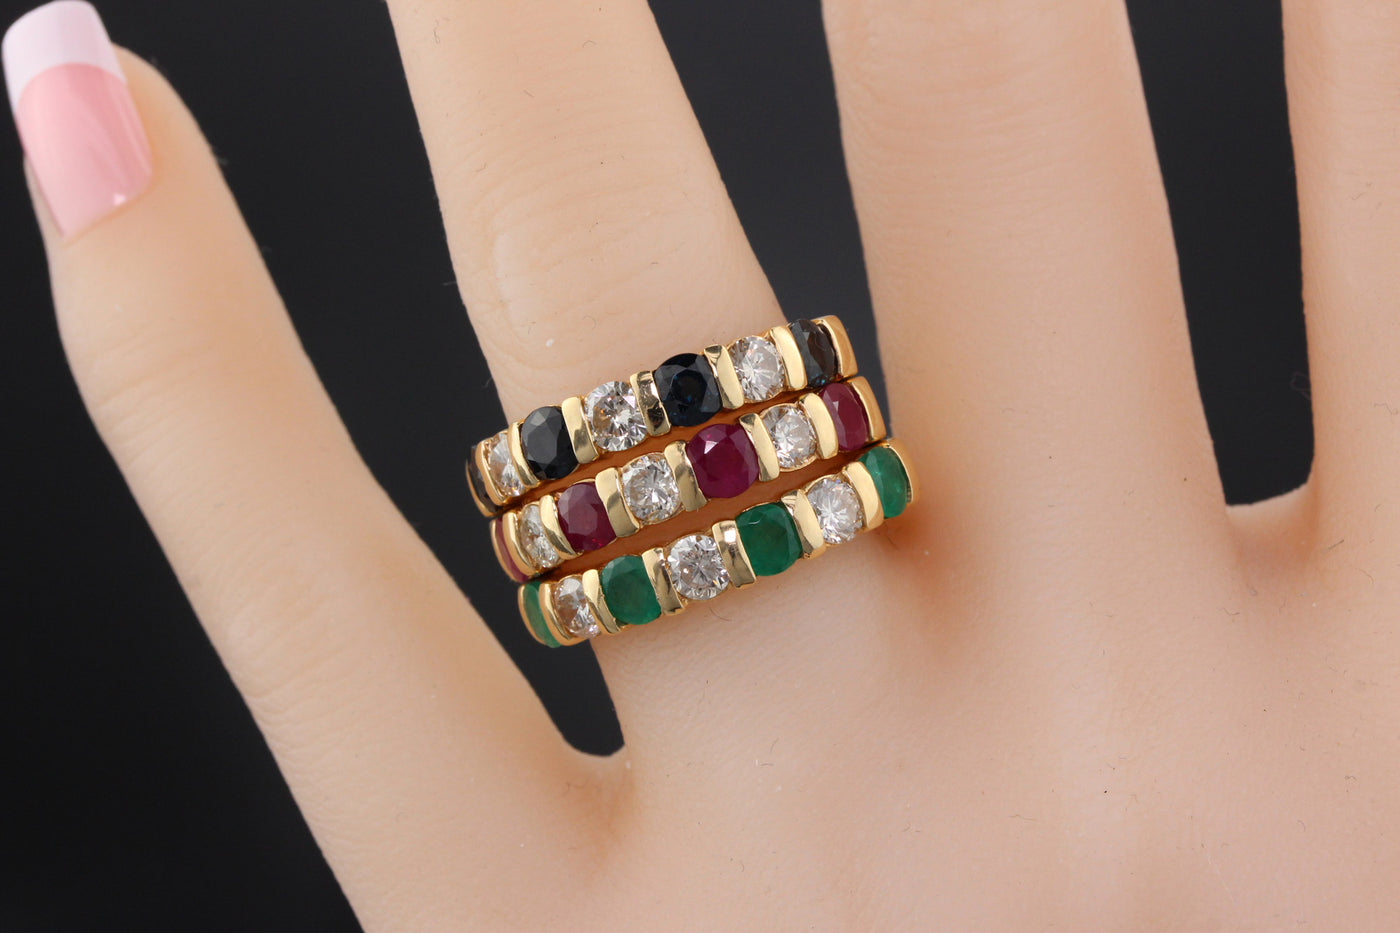 Set of 3 Vintage Estate 14K Yellow Gold Diamond Ruby Sapphire Emerald Stacking Rings - The Antique Parlour